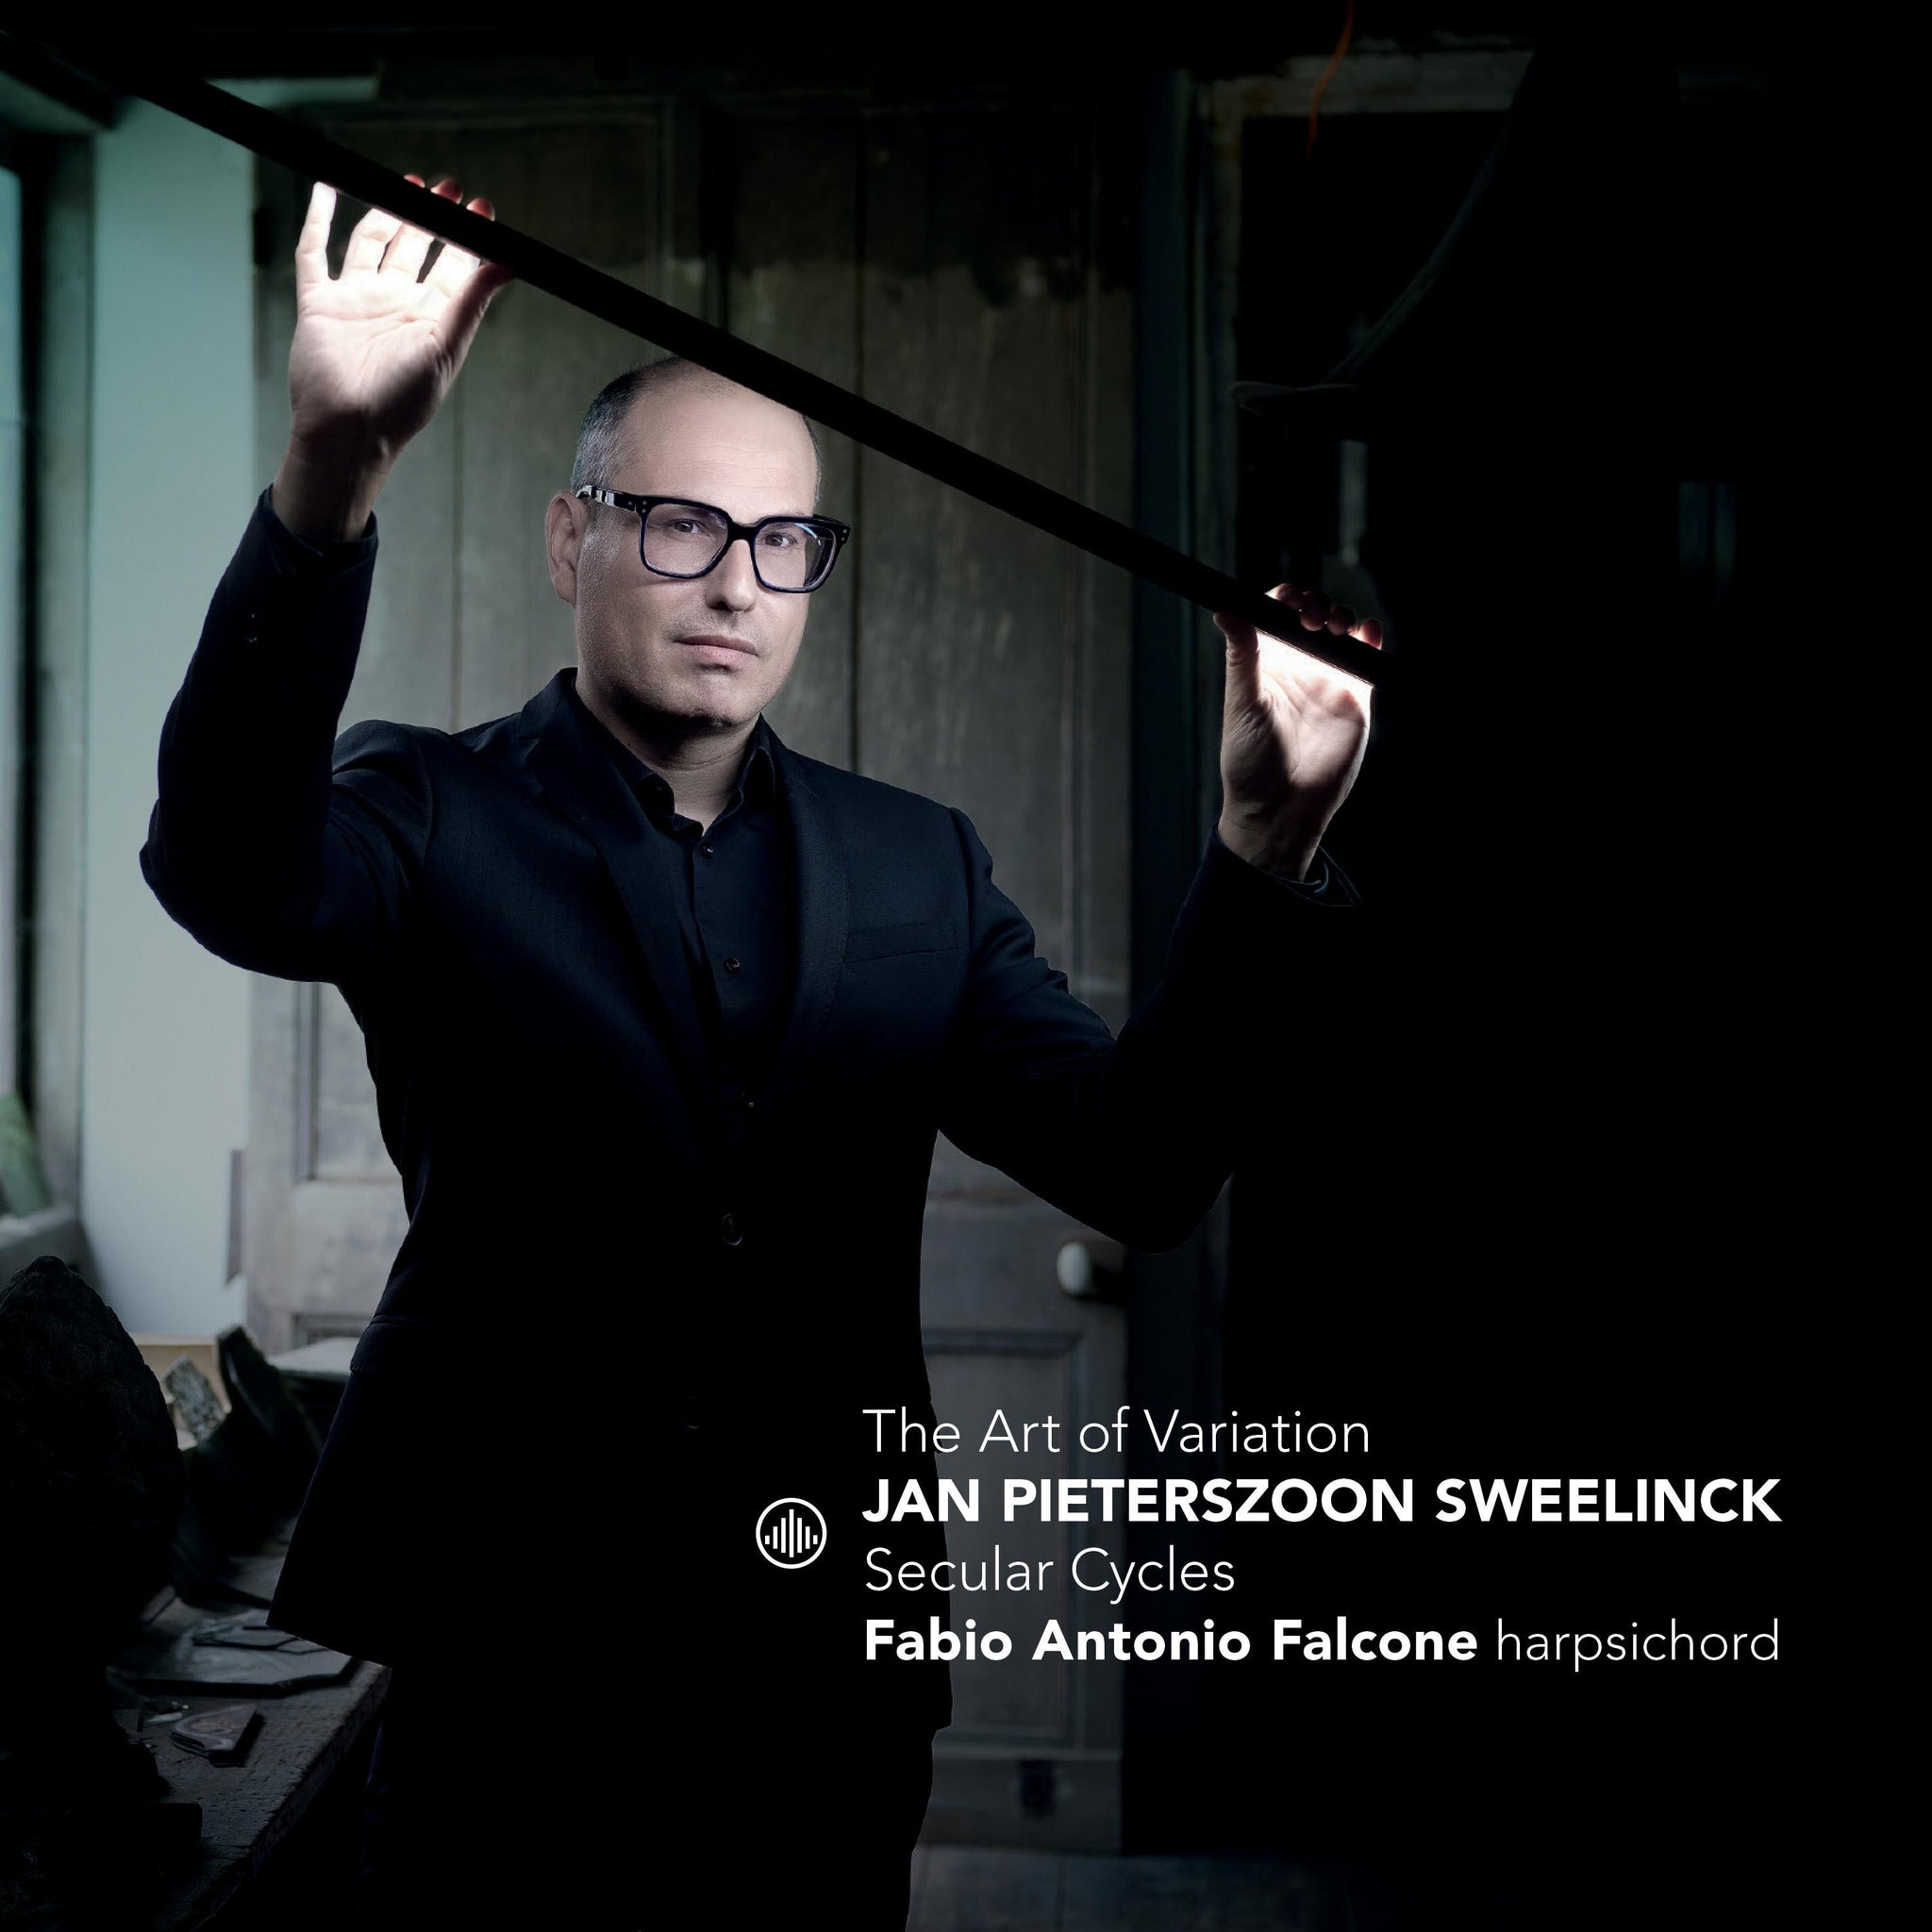 Sweelinck: The Art of Variation - Secular Cycles for Harpsichord / Falcone